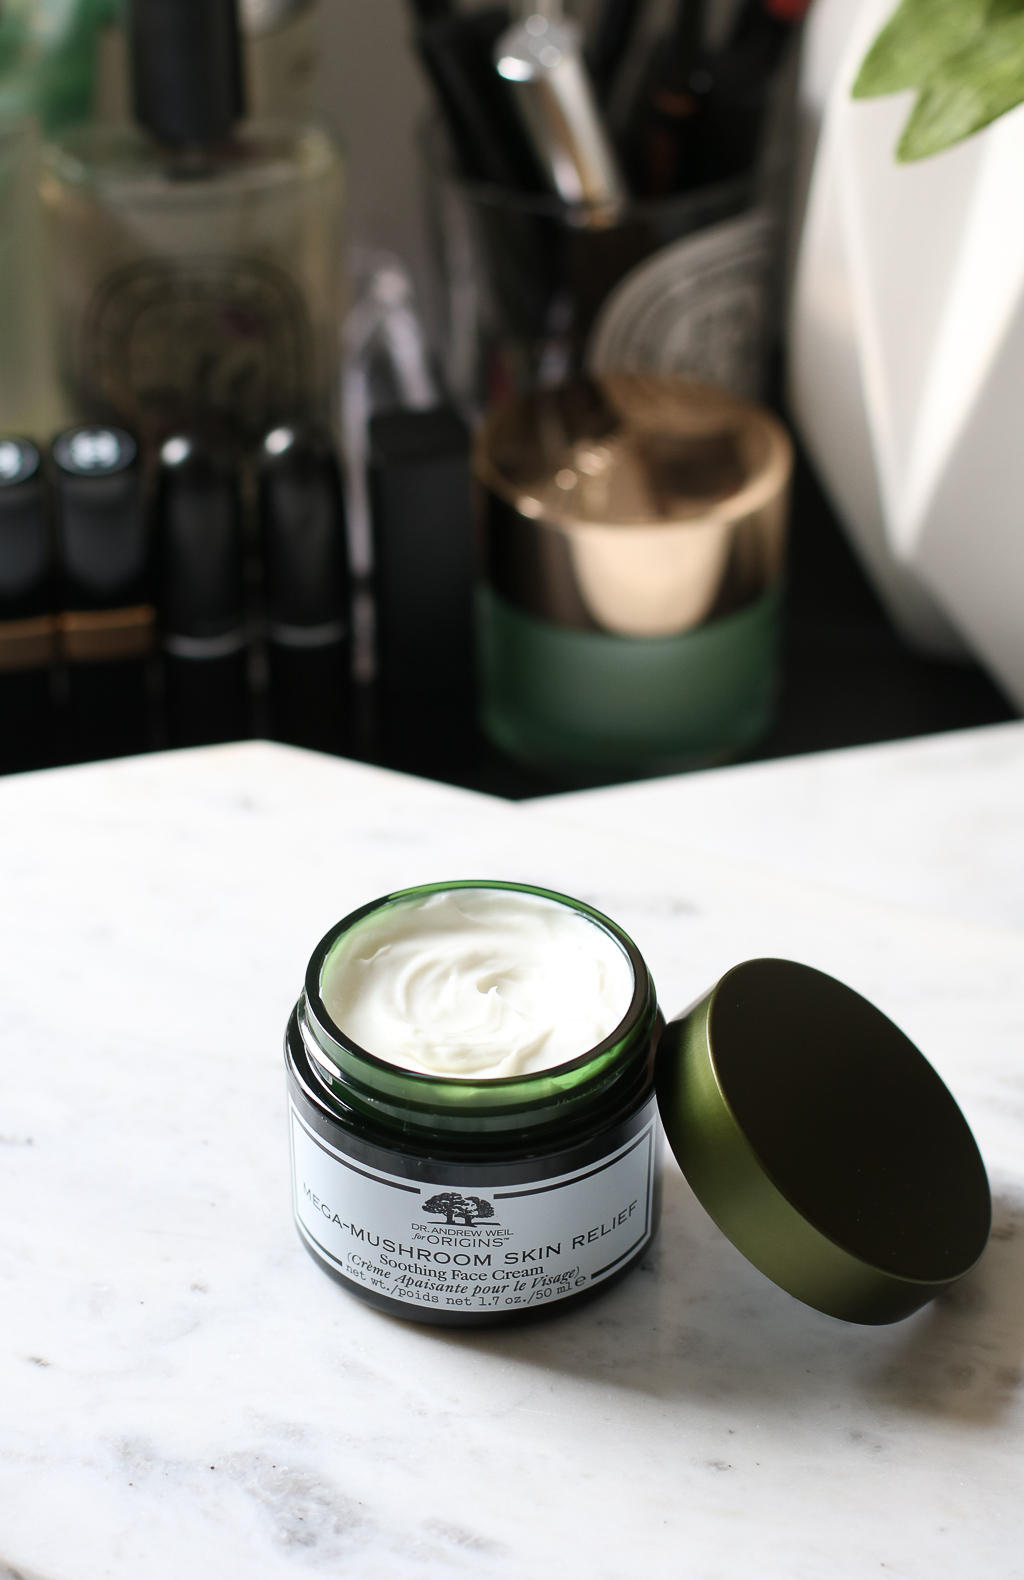 Origins Mega-Mushroom Skin Relief Line - exactly what your skin needs during these dry winter months! | Style Domination